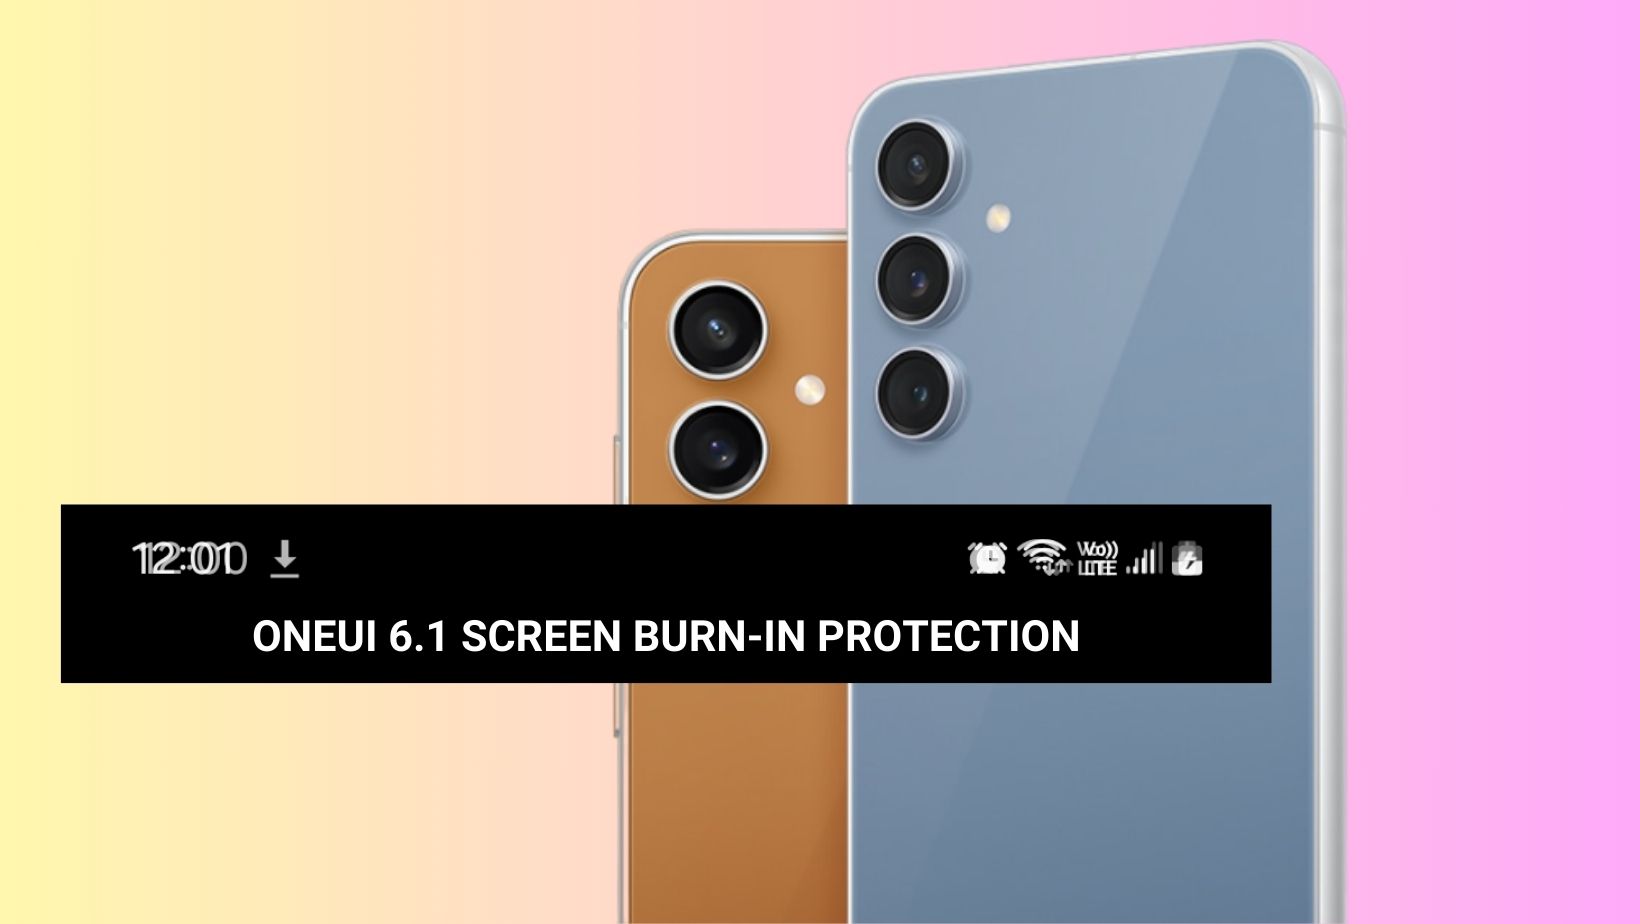 Samsung’s One UI 6.1 firmware update adds screen burn-in protection back to the status bar